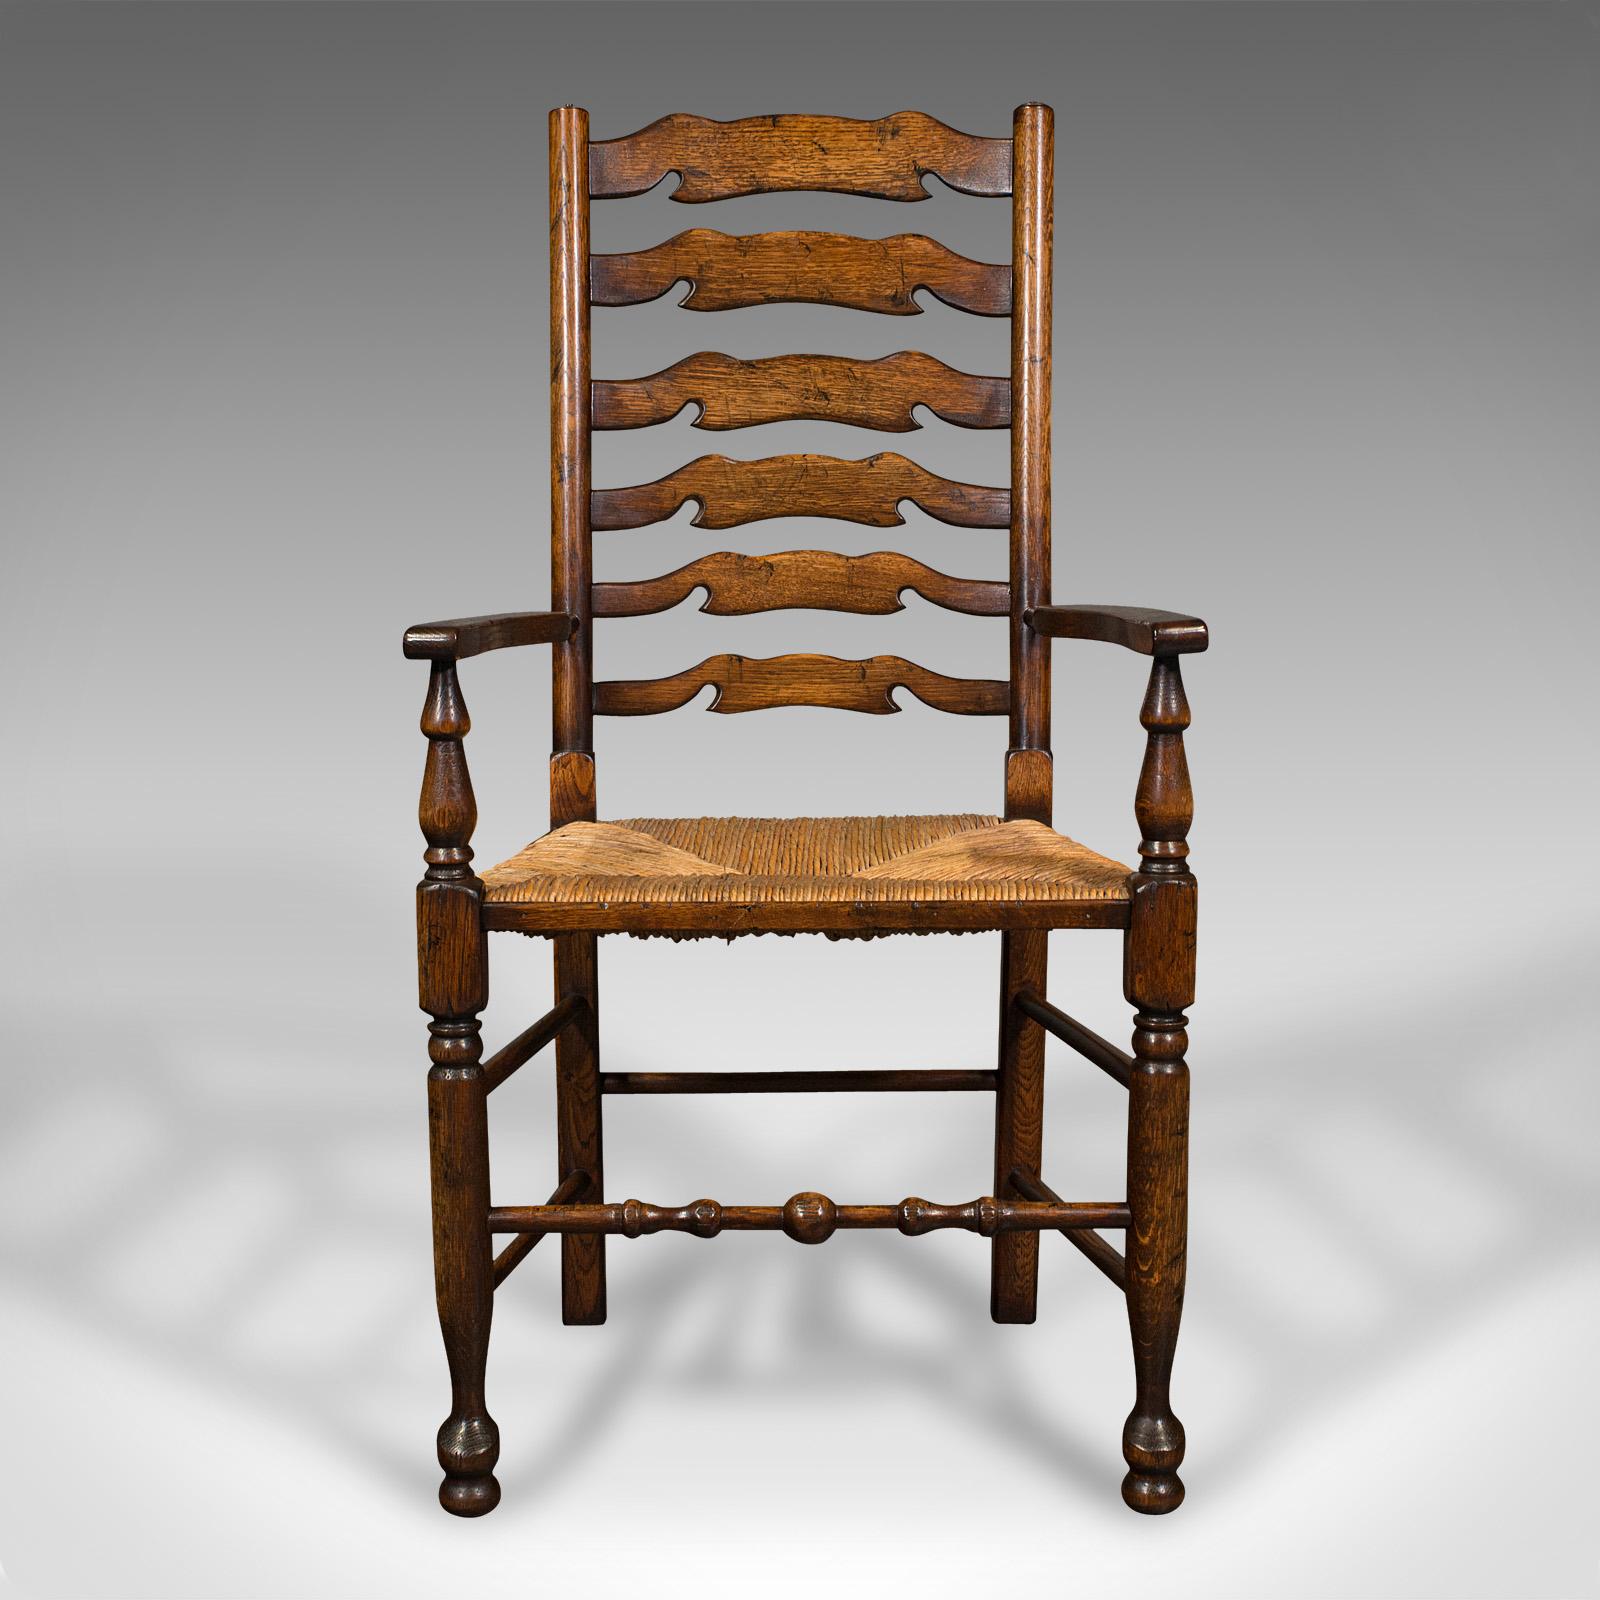 This is a set of 8 vintage Lancashire wavy line ladder back chairs. An English, oak and woven rush dining suite with Georgian revival taste, dating to the late 20th century, circa 1980.

Large dining suite of two carvers and six chairs of superb